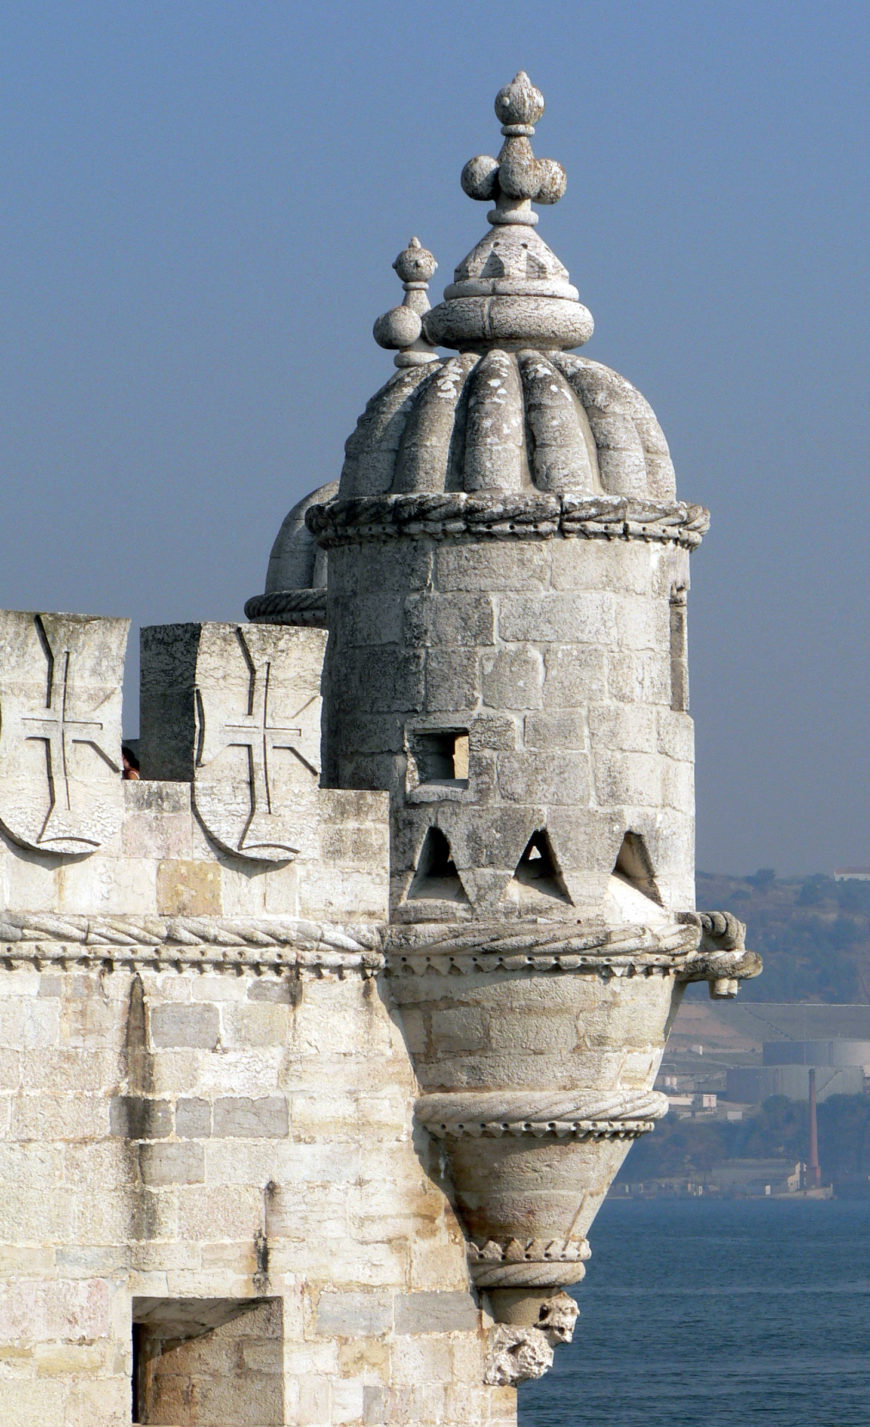 Smaller tower, Tower of Belem, Lisbon, Portugal (Patrick Clenet, CC BY-SA 3.0)